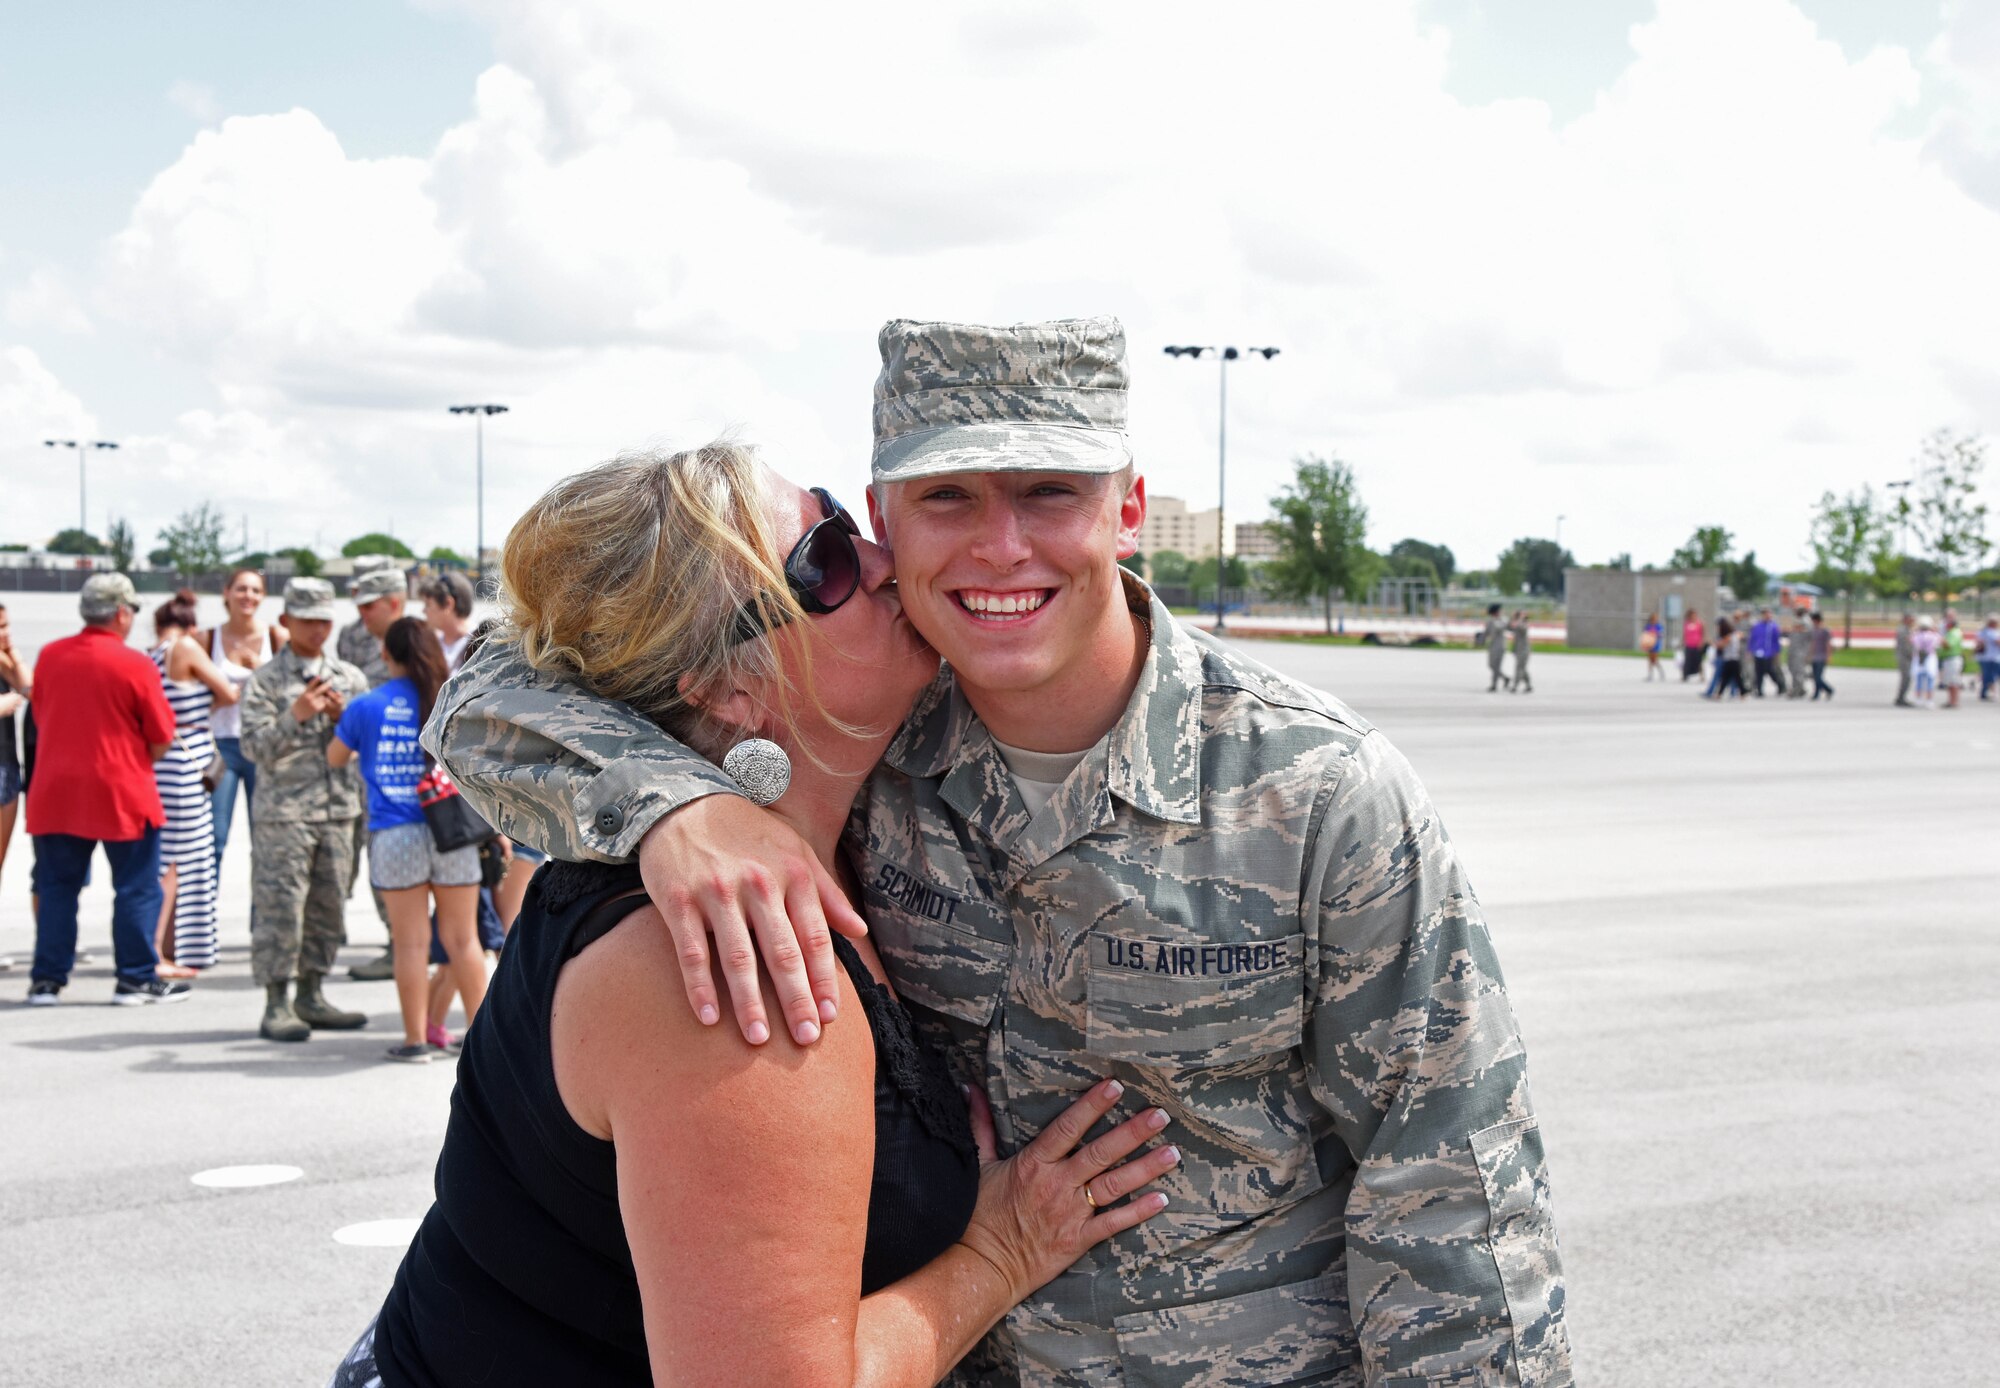 Logan Schmidt, right, poses for a photograph with his mother Anne after a graduation ceremony at Joint Base San Antonio, Texas, June 26. Logan was the last of his brothers to join the Air Force and currently is in technical school to become a medical technician. (Courtesy photo Airman 1st Class Collin Schmidt)